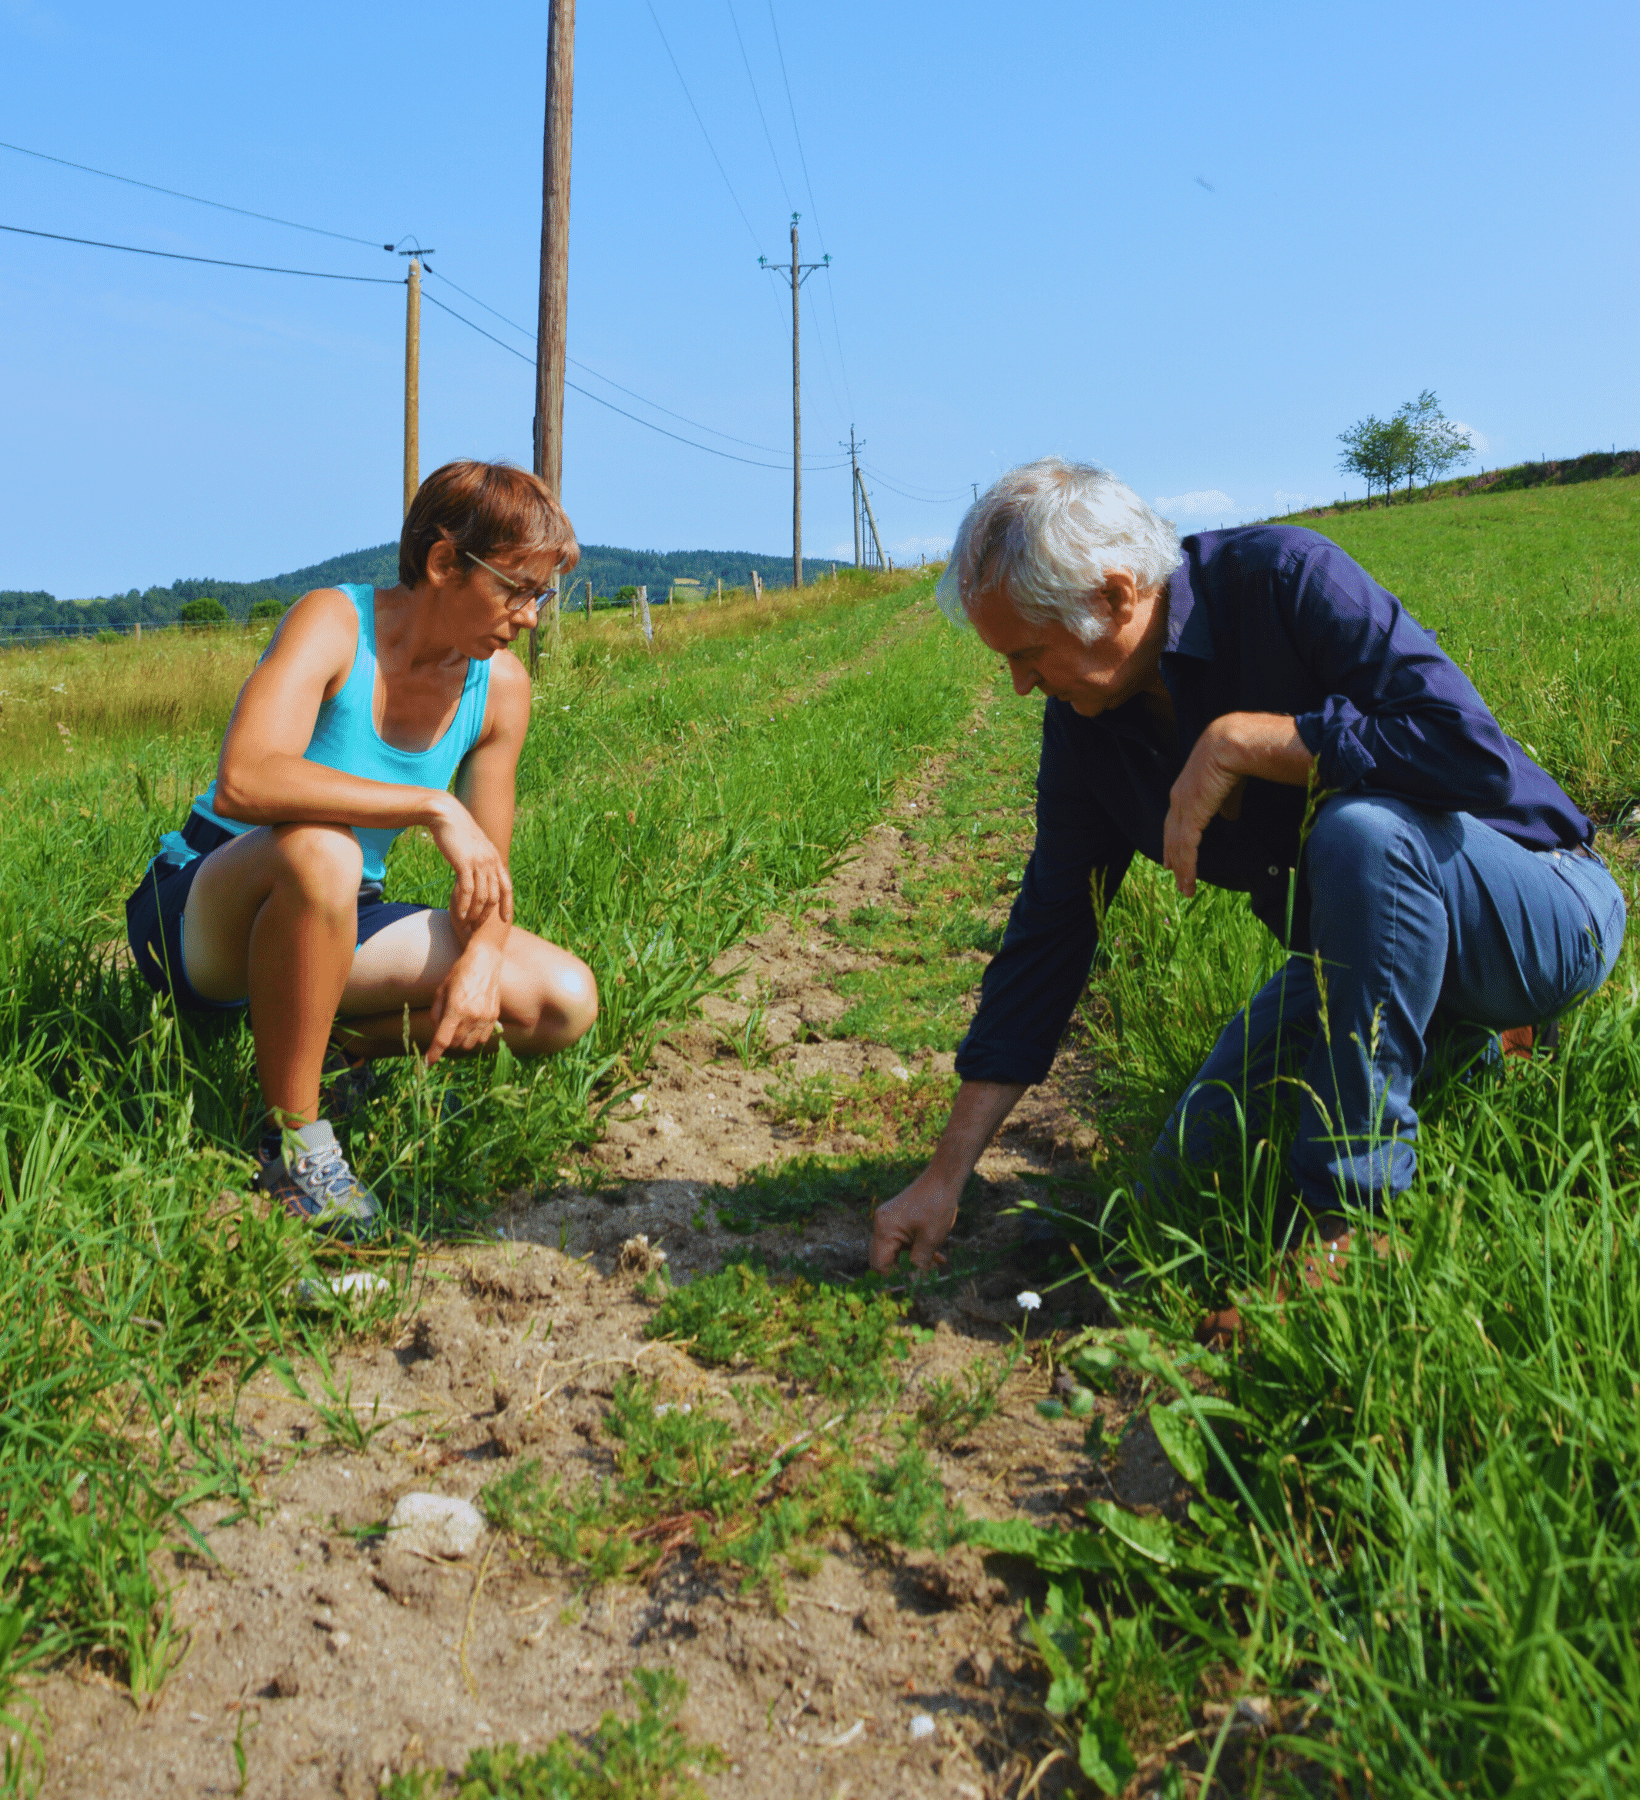 Laurent Gautun chatting with a grower in her field